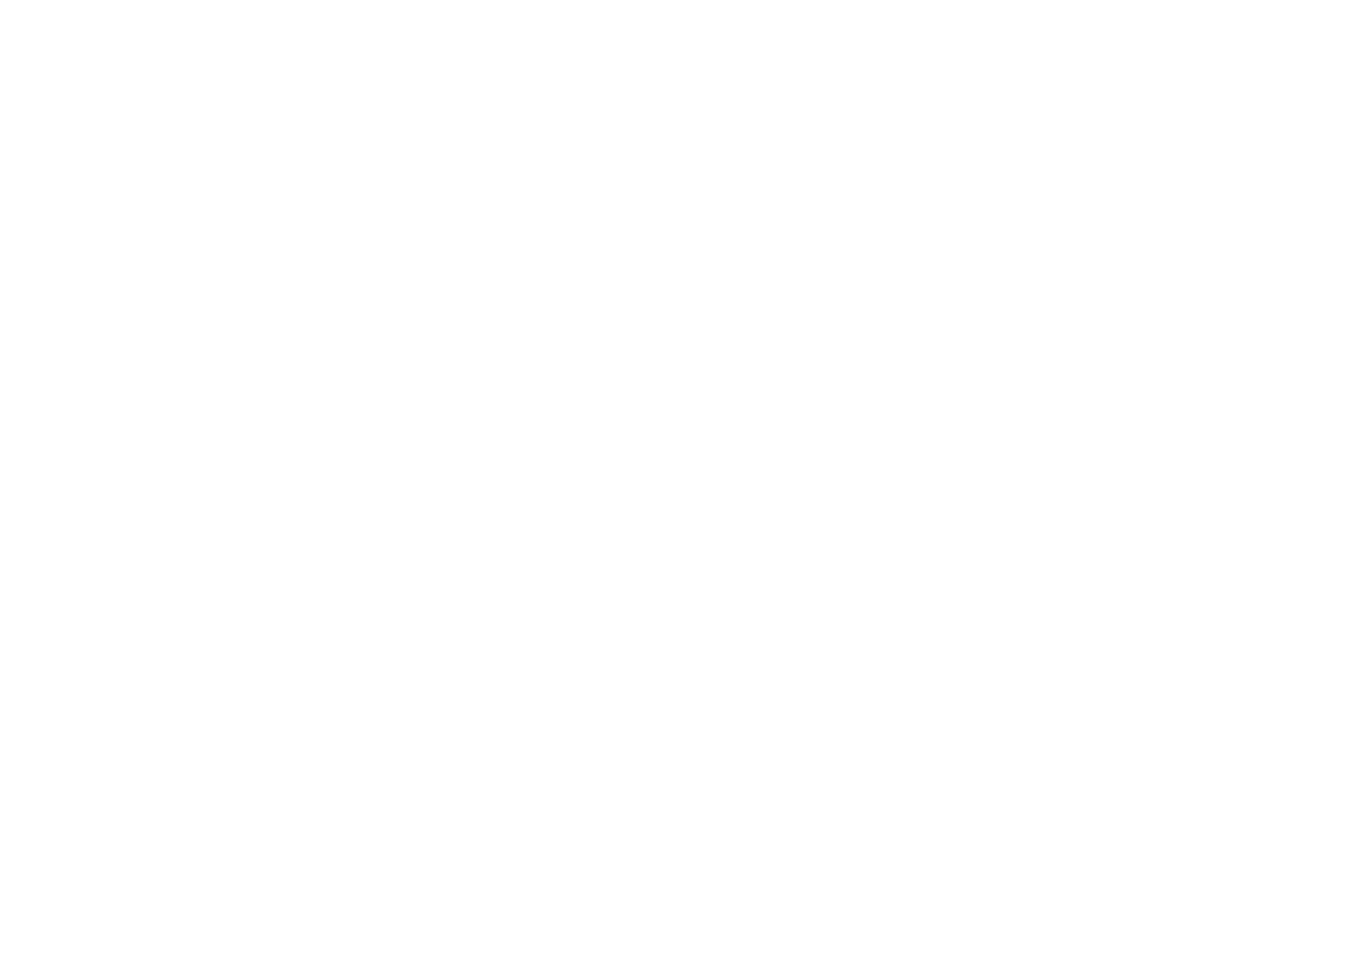 Zoom Workplace のロゴ